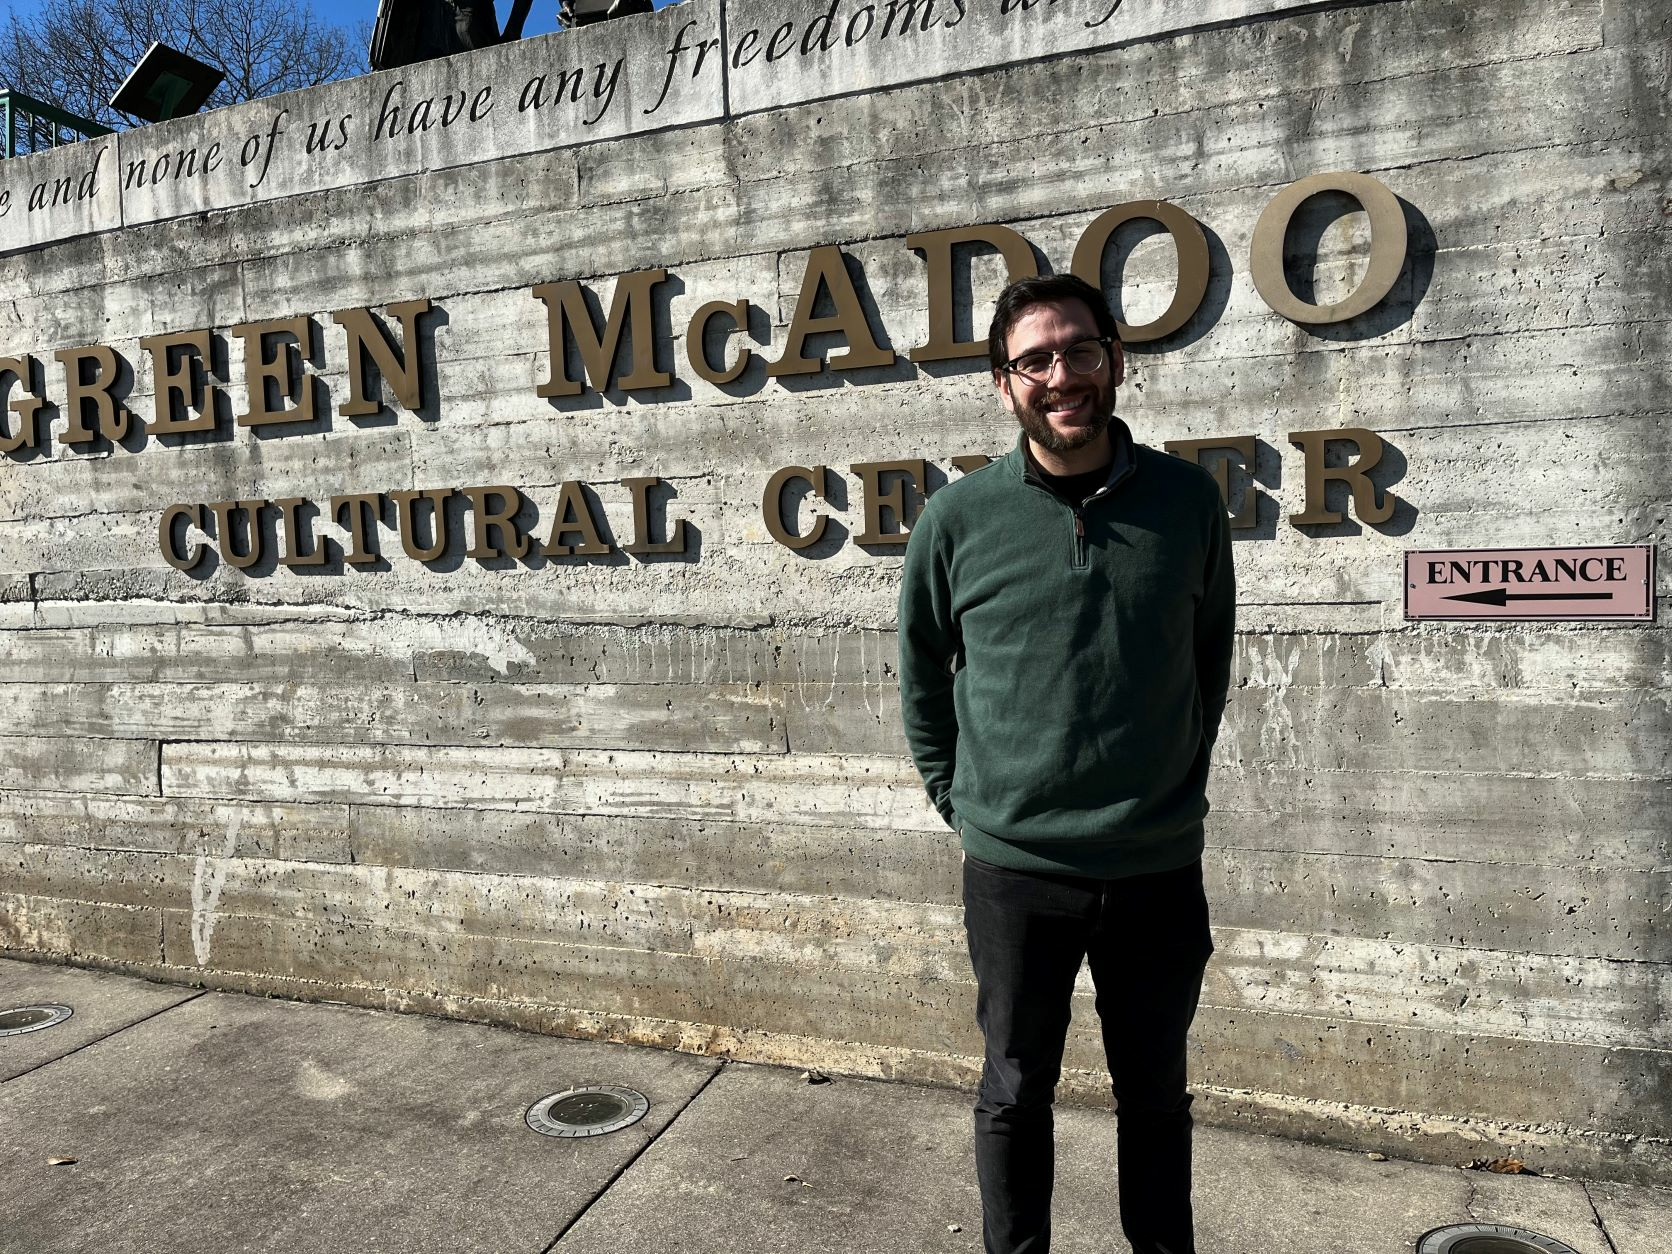 Adam Velk stands in front of the Green McAdoo Cultural Center welcome sign